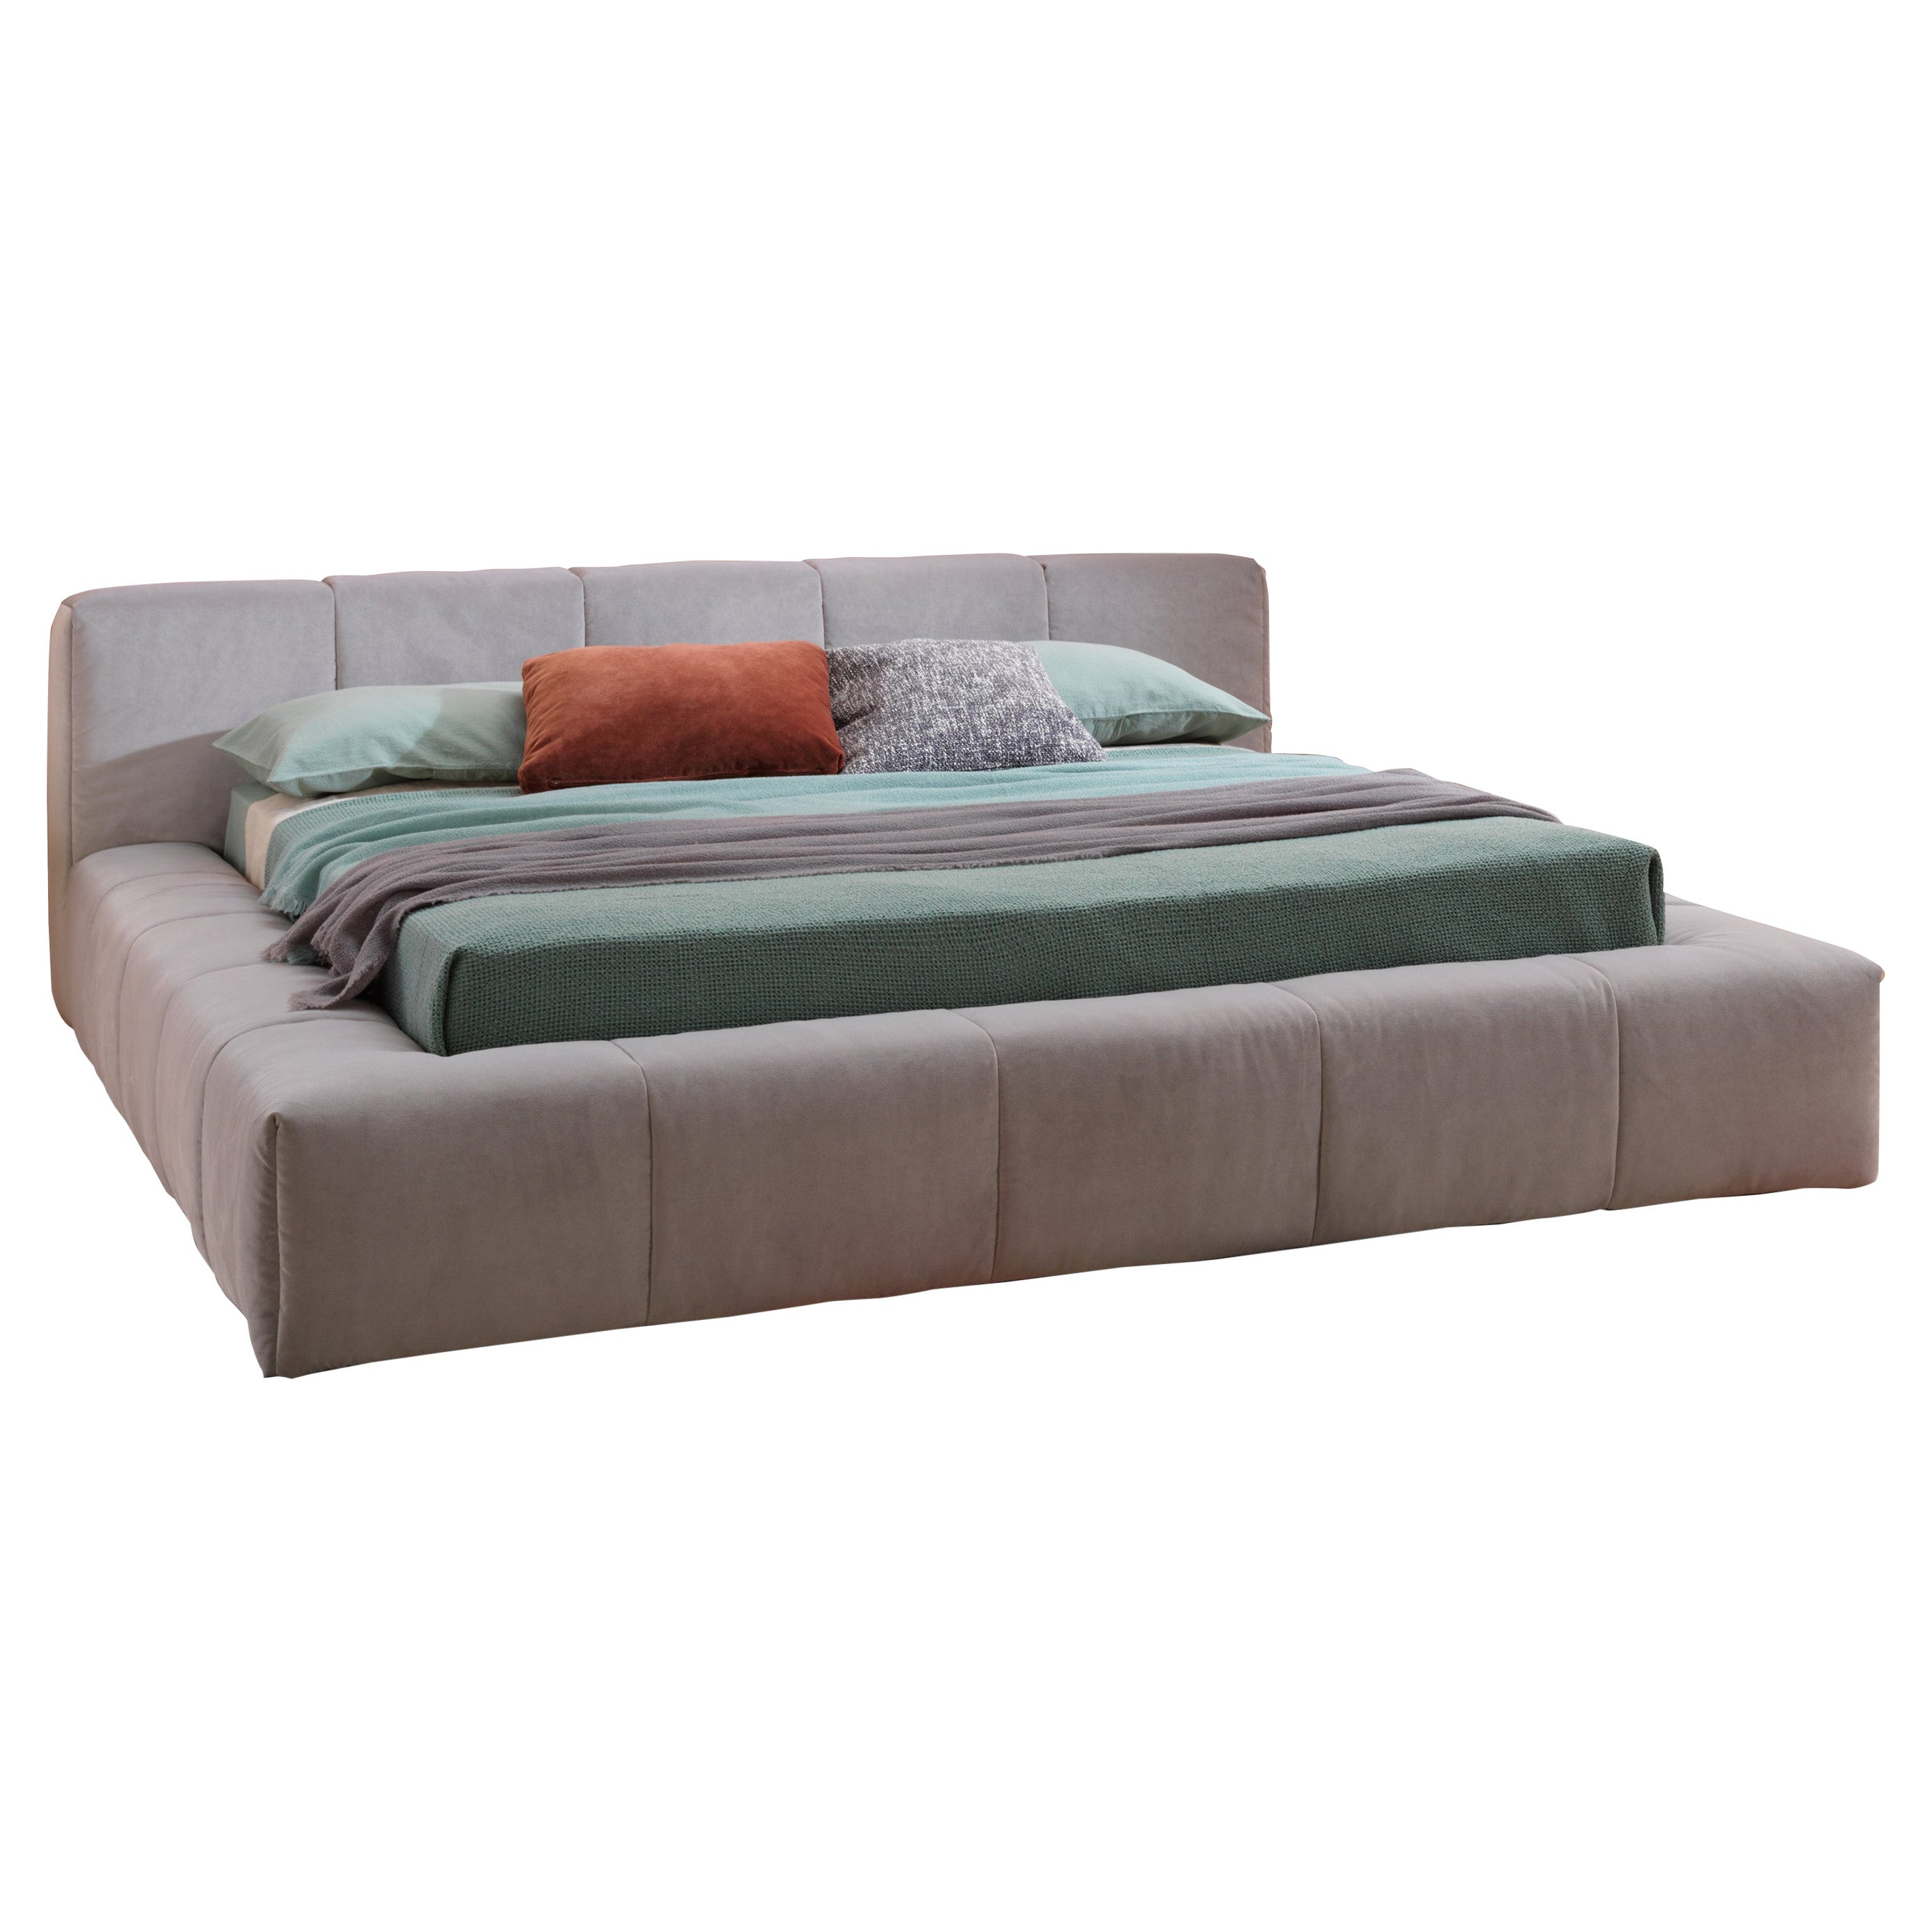 Pixel Box Large Queen Size Bed in Velvet Upholstery with Base by Sergio Bicego For Sale